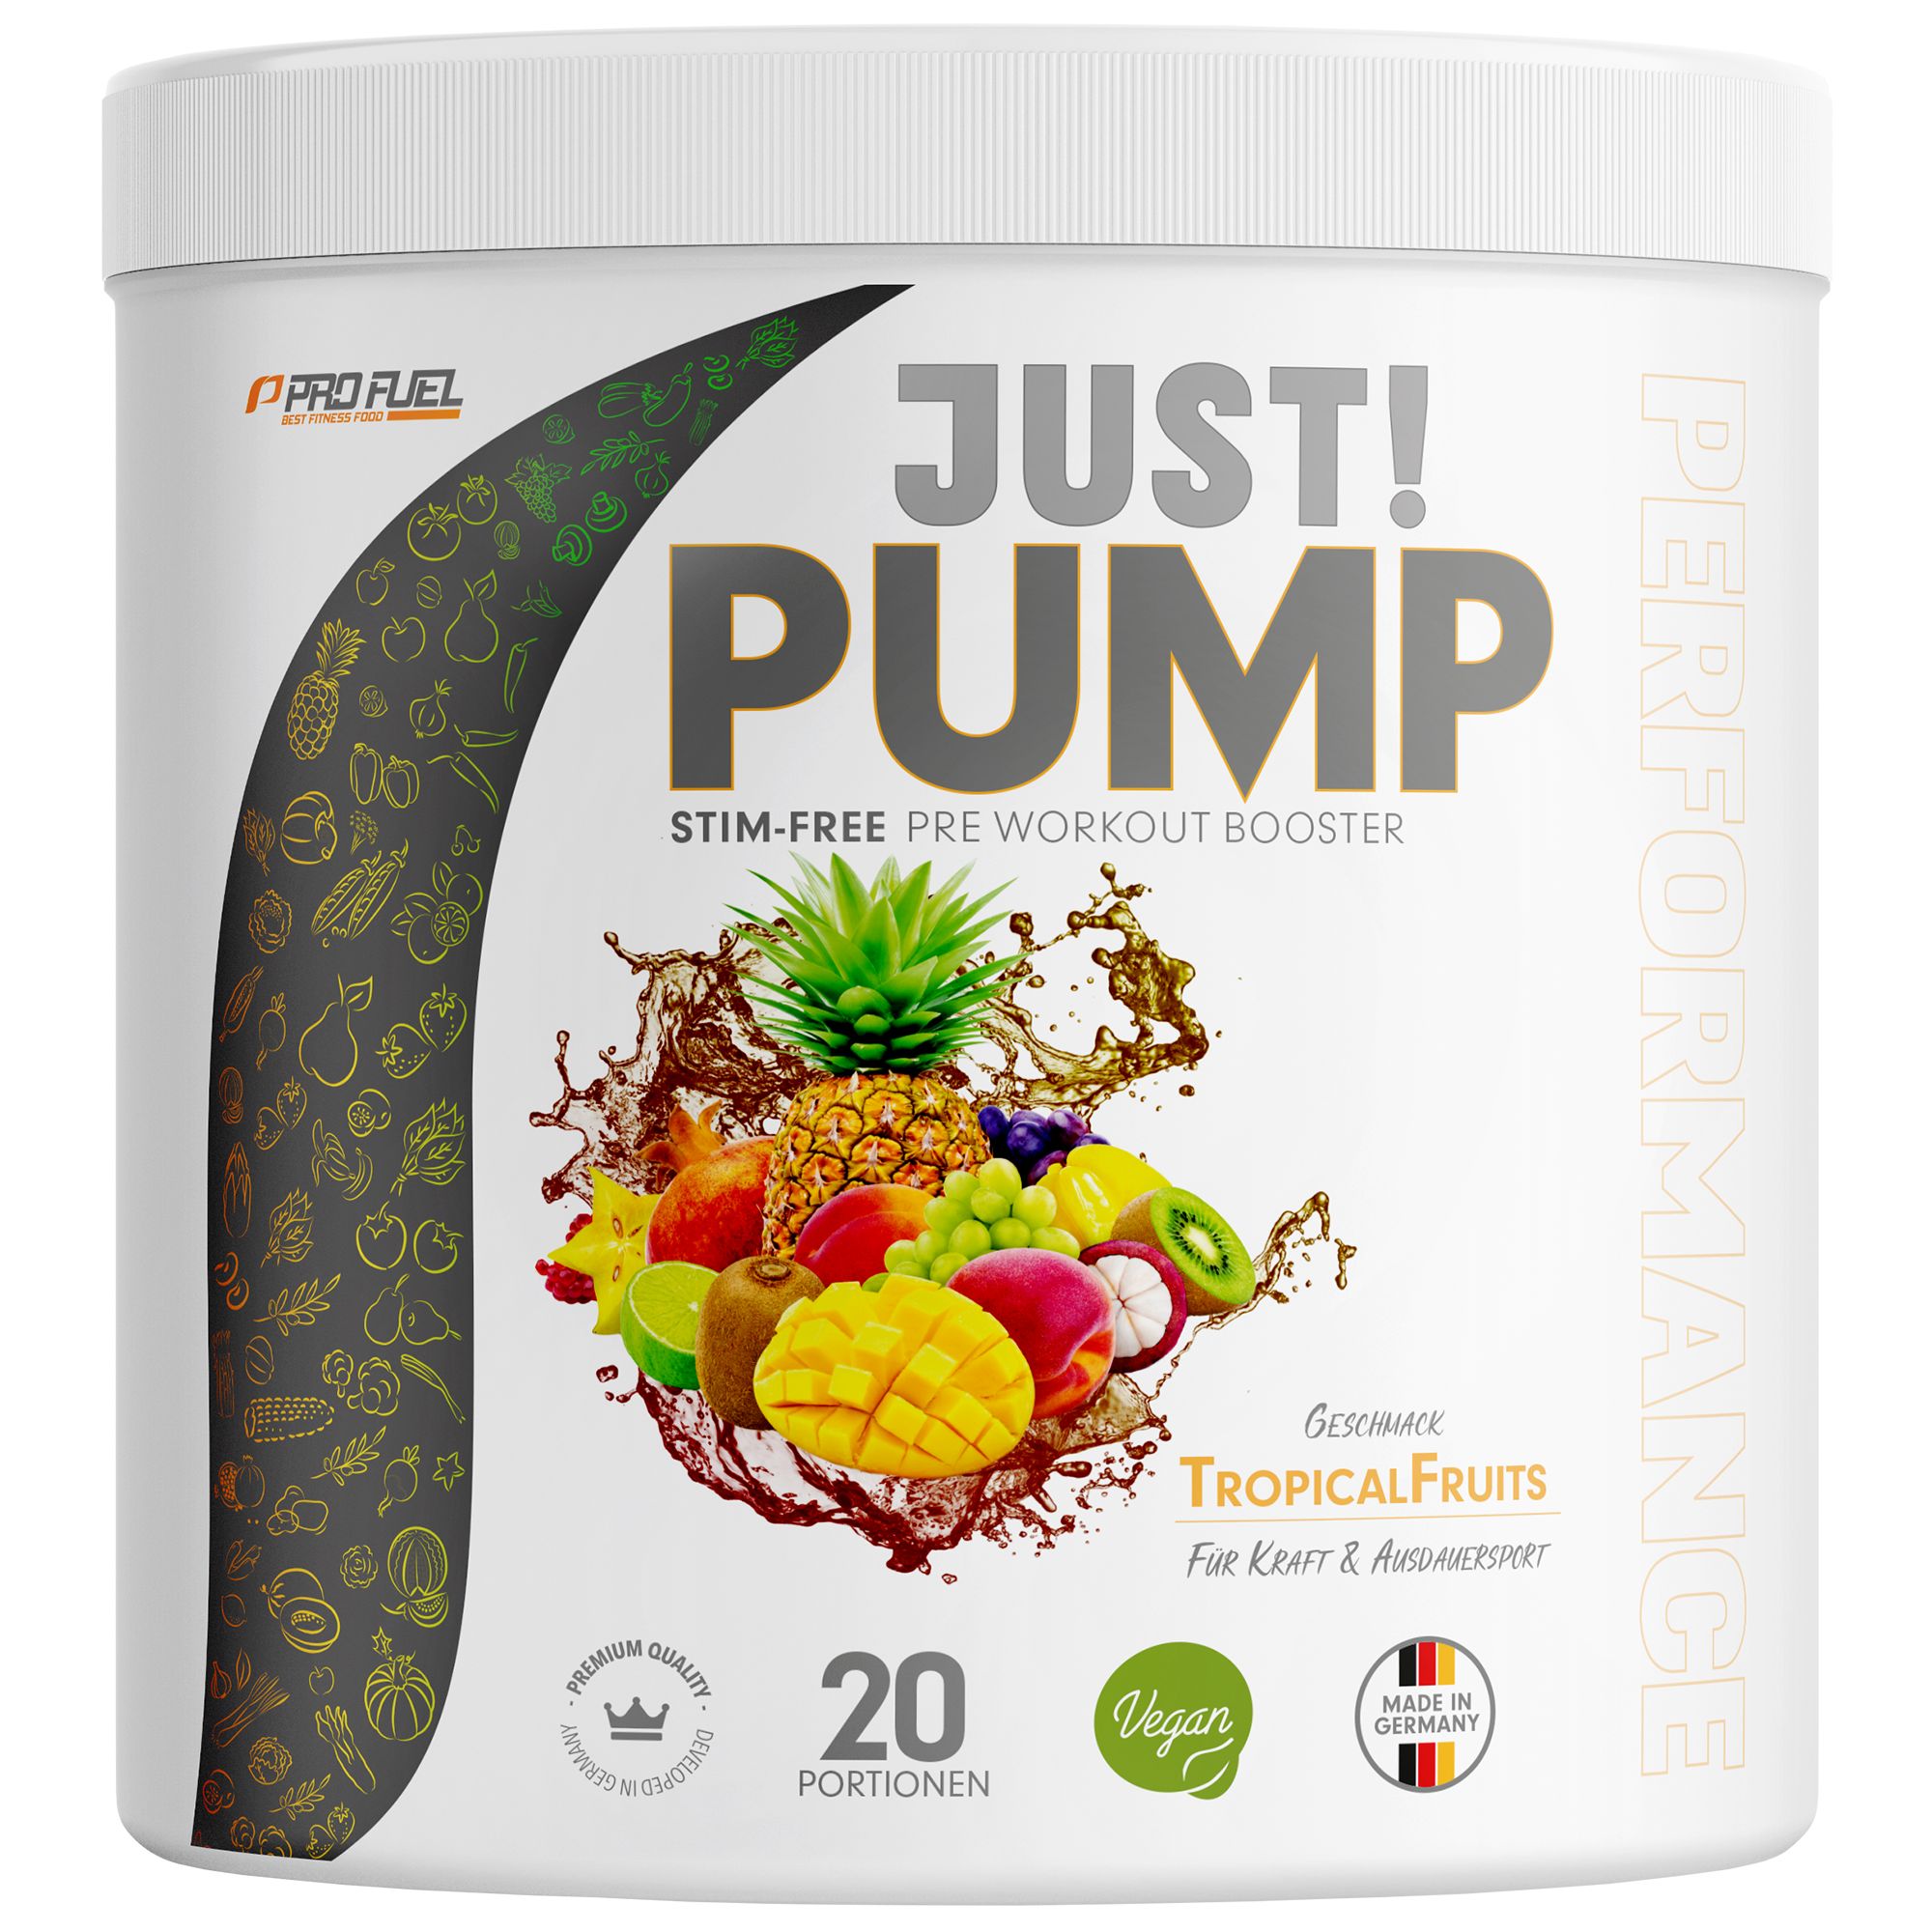 ProFuel - JUST! PUMP Pre-Workout-Booster ohne Koffein